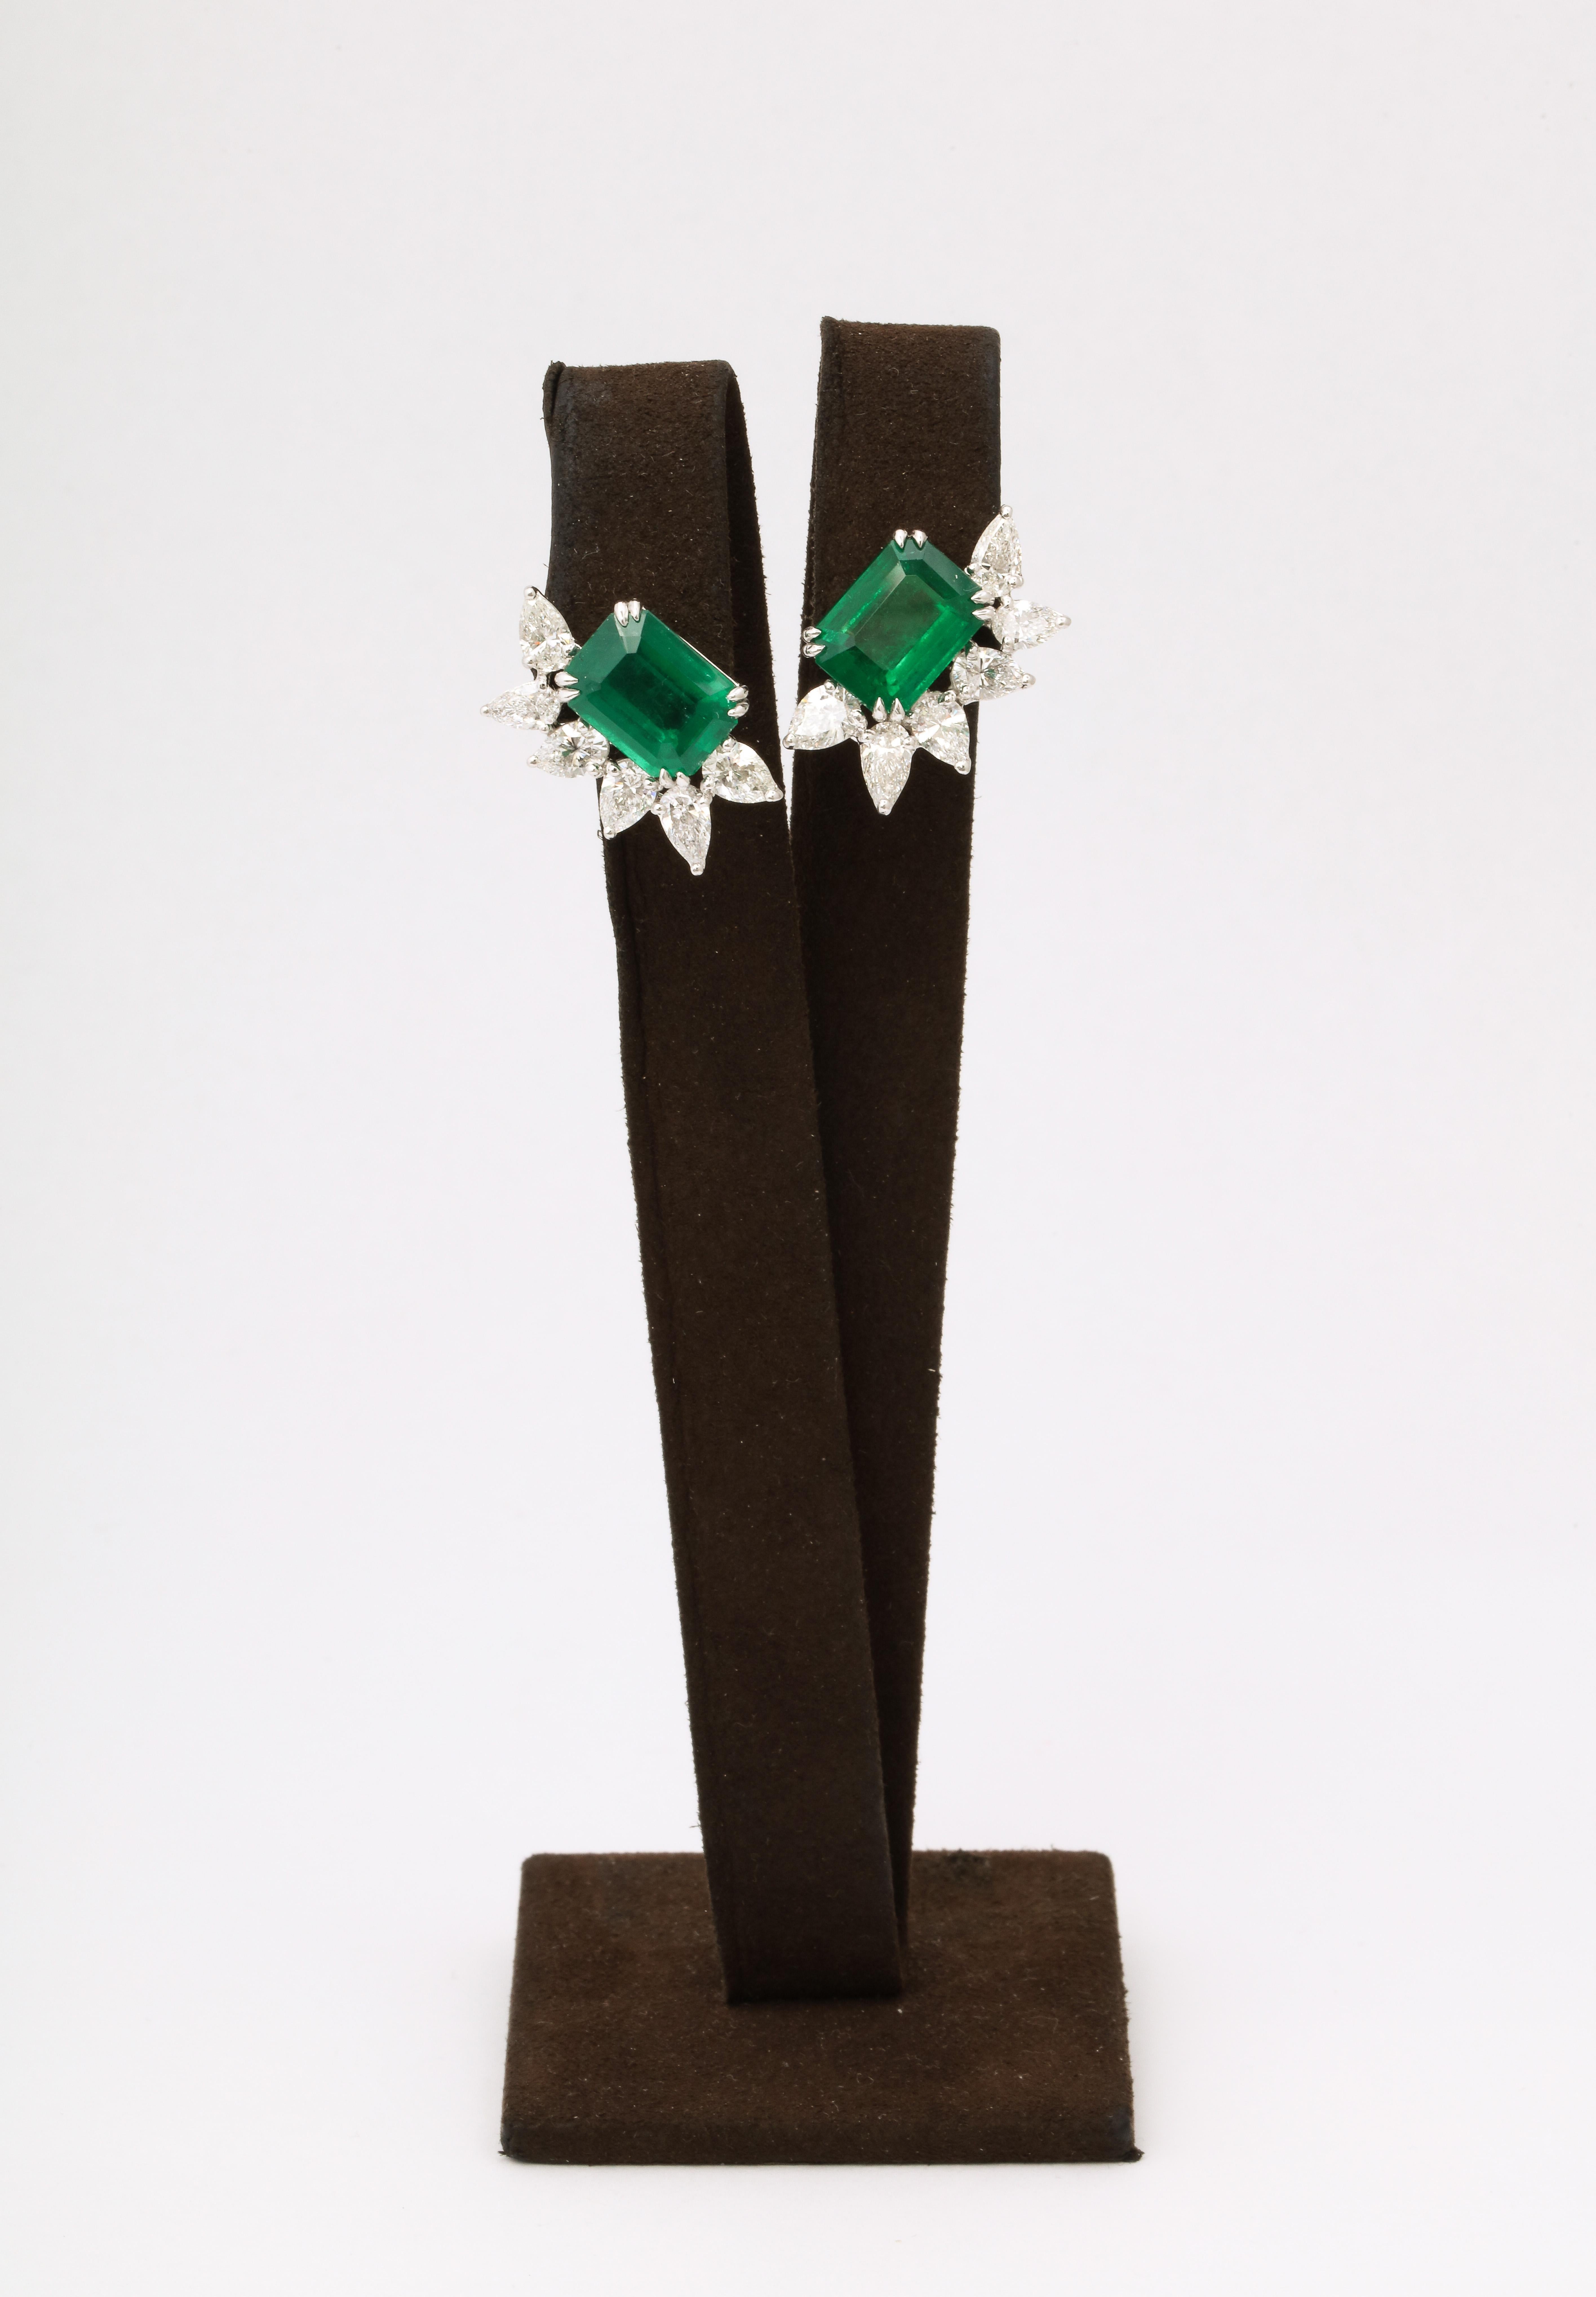 
A remarkable earring found in the highest jewelry houses. 

11.02 carats of certified Intense Green Emerald cut Emeralds. 

4.56 carats of white pear shape diamonds. 

Set in platinum. 

Approximately an inch long from the highest to lowest point.